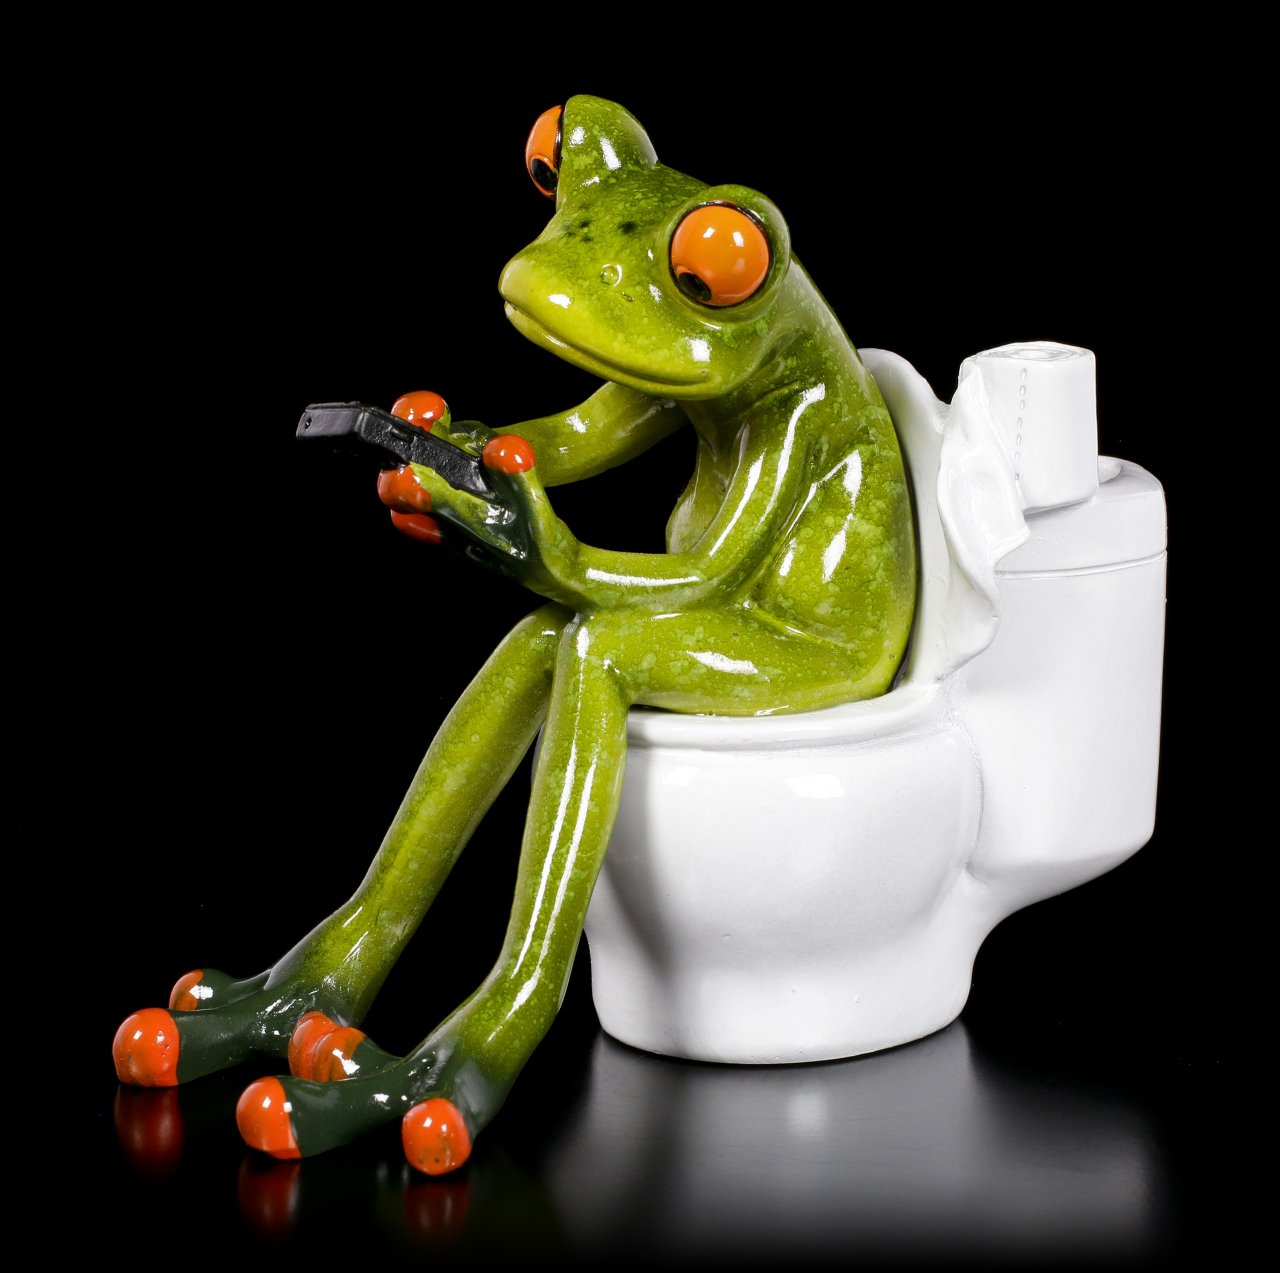 Funny Frog Figurine - On the Toilet